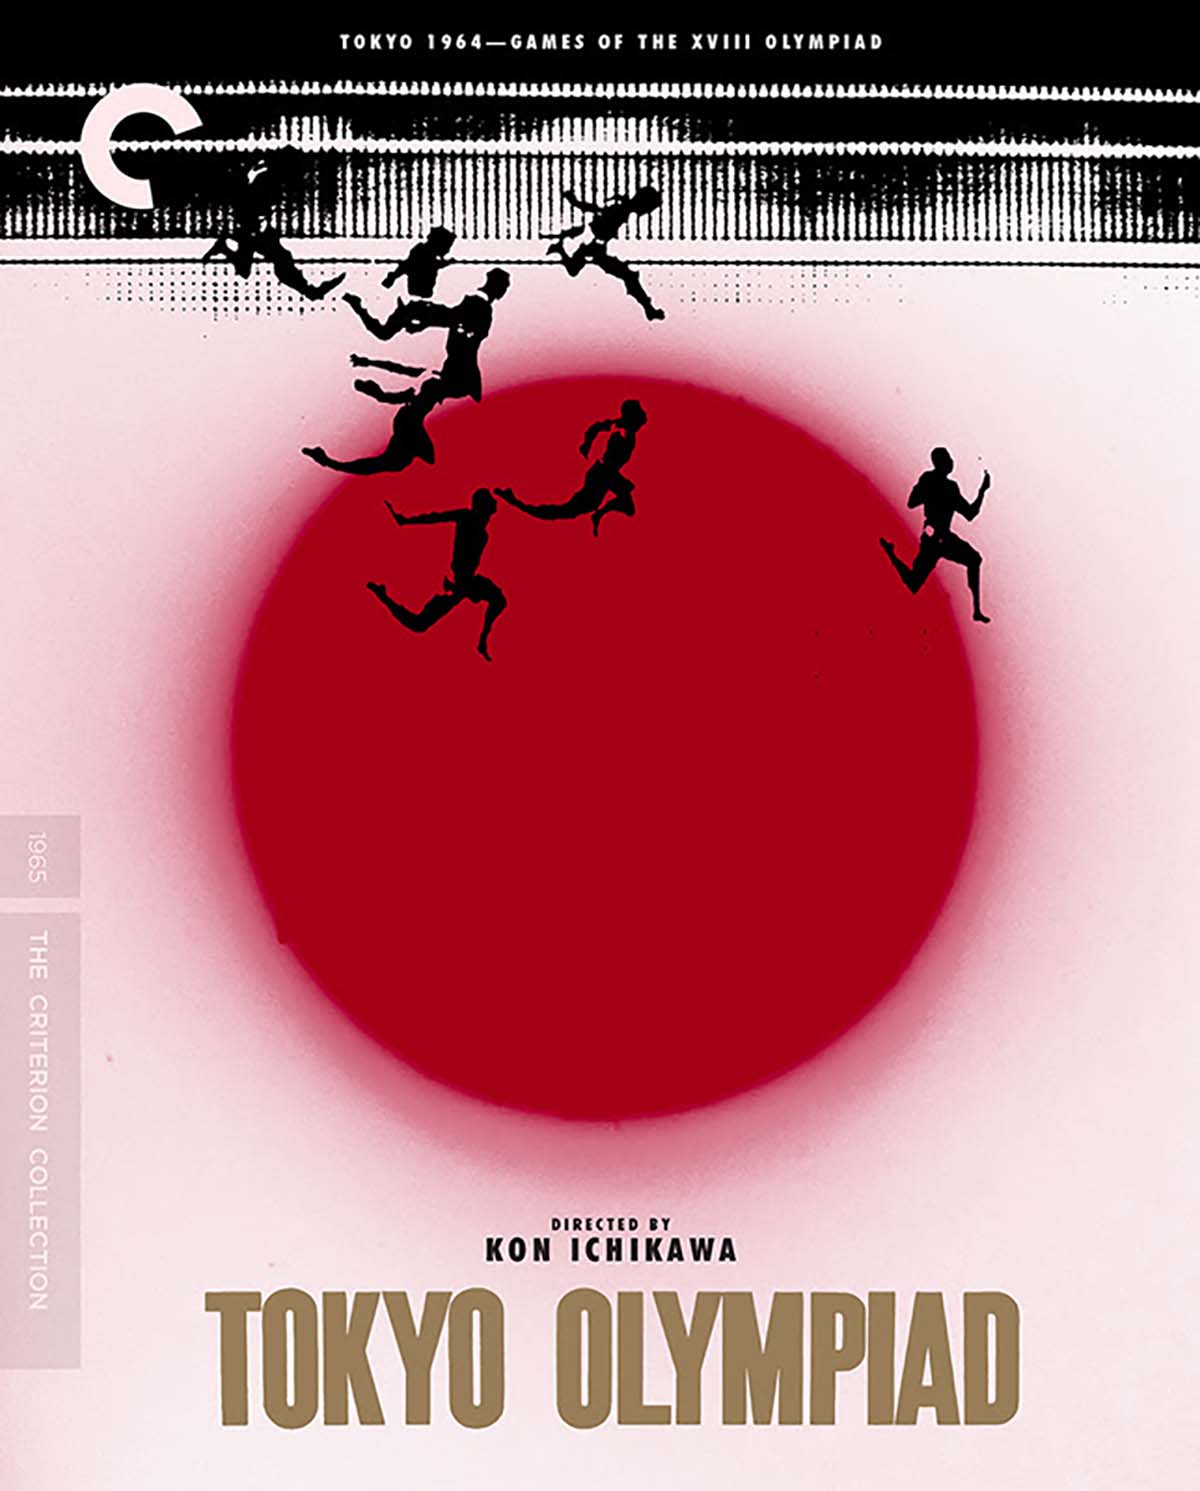 Tokyo Olympiad Criterion Cover